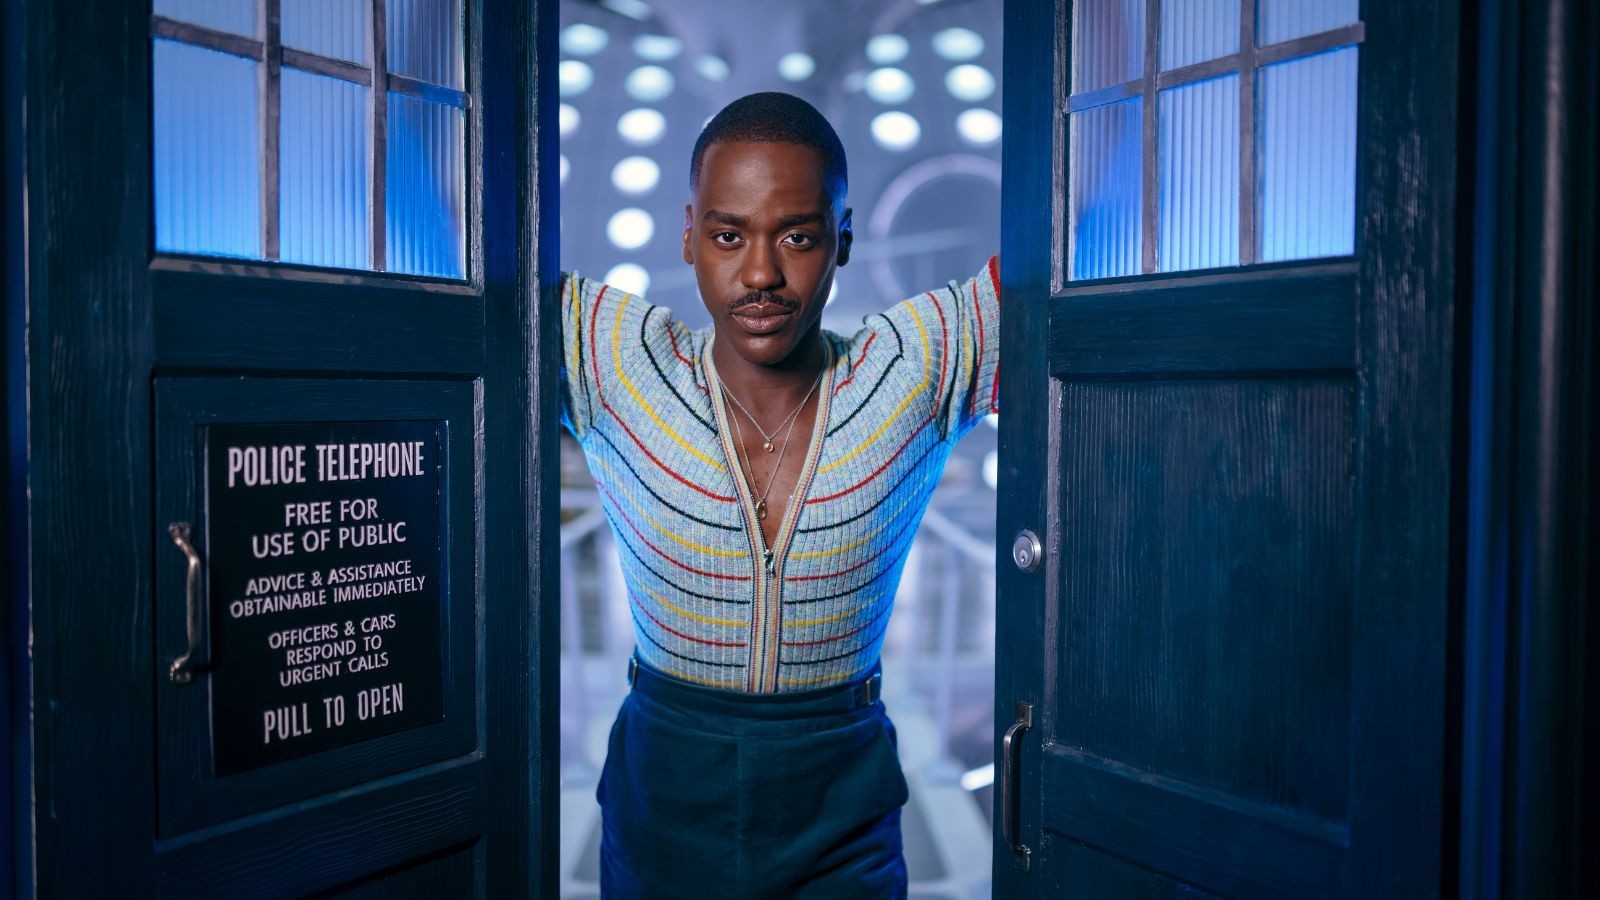 Ncuti Gatwa as The Doctor, in Doctor Who on BBC